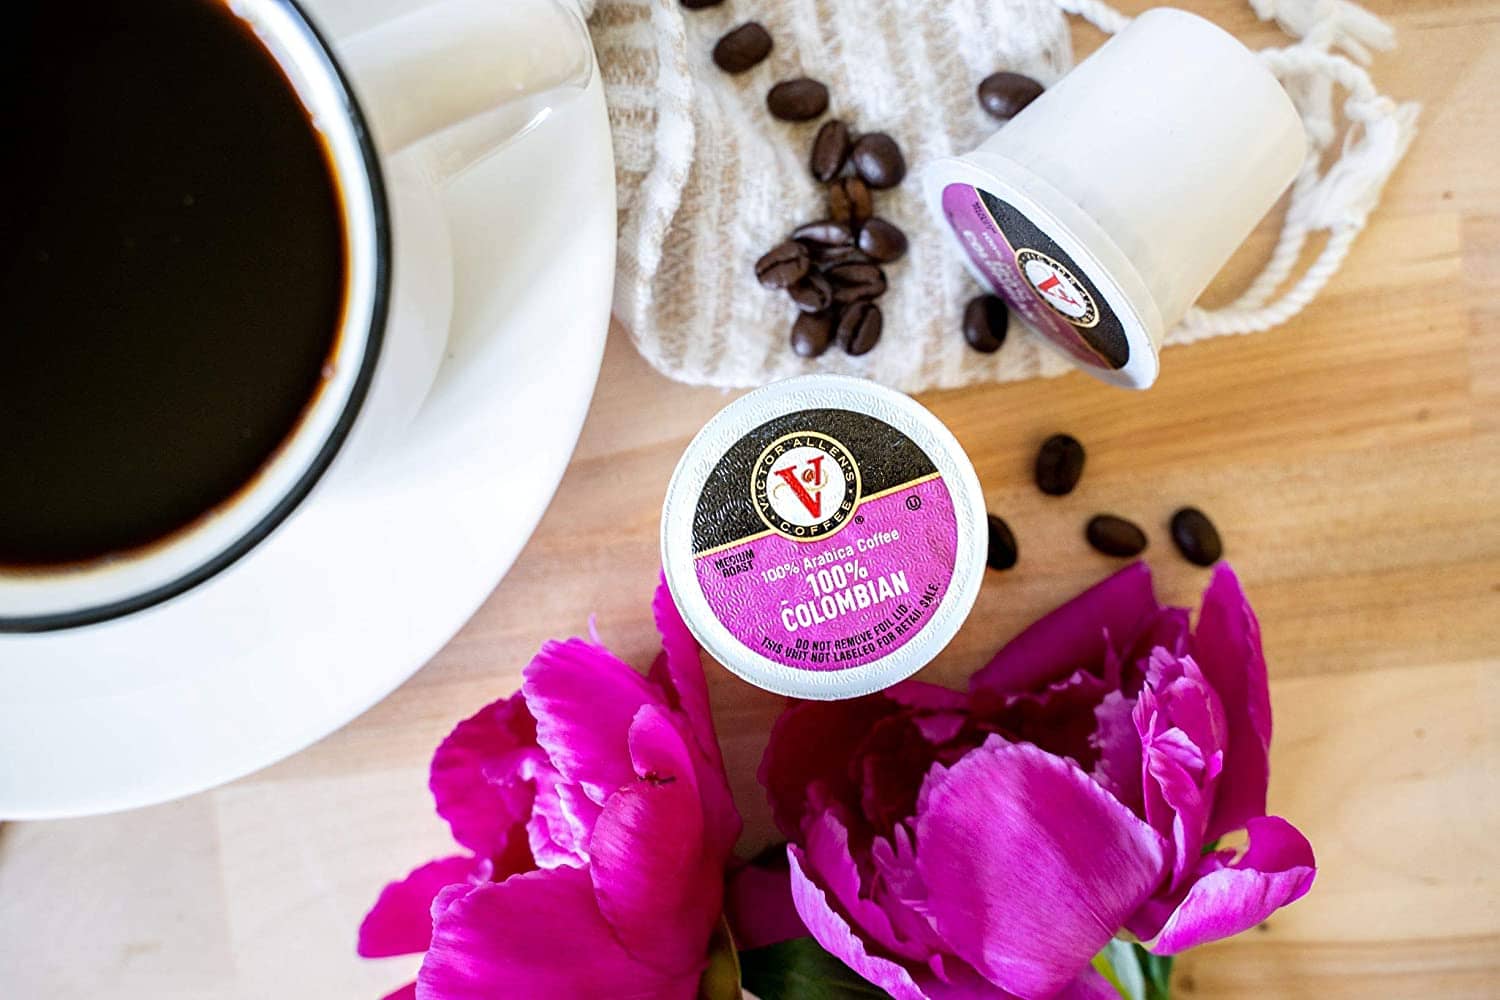 Can You Open K-Cups and Use Them in Regular Coffee Makers?